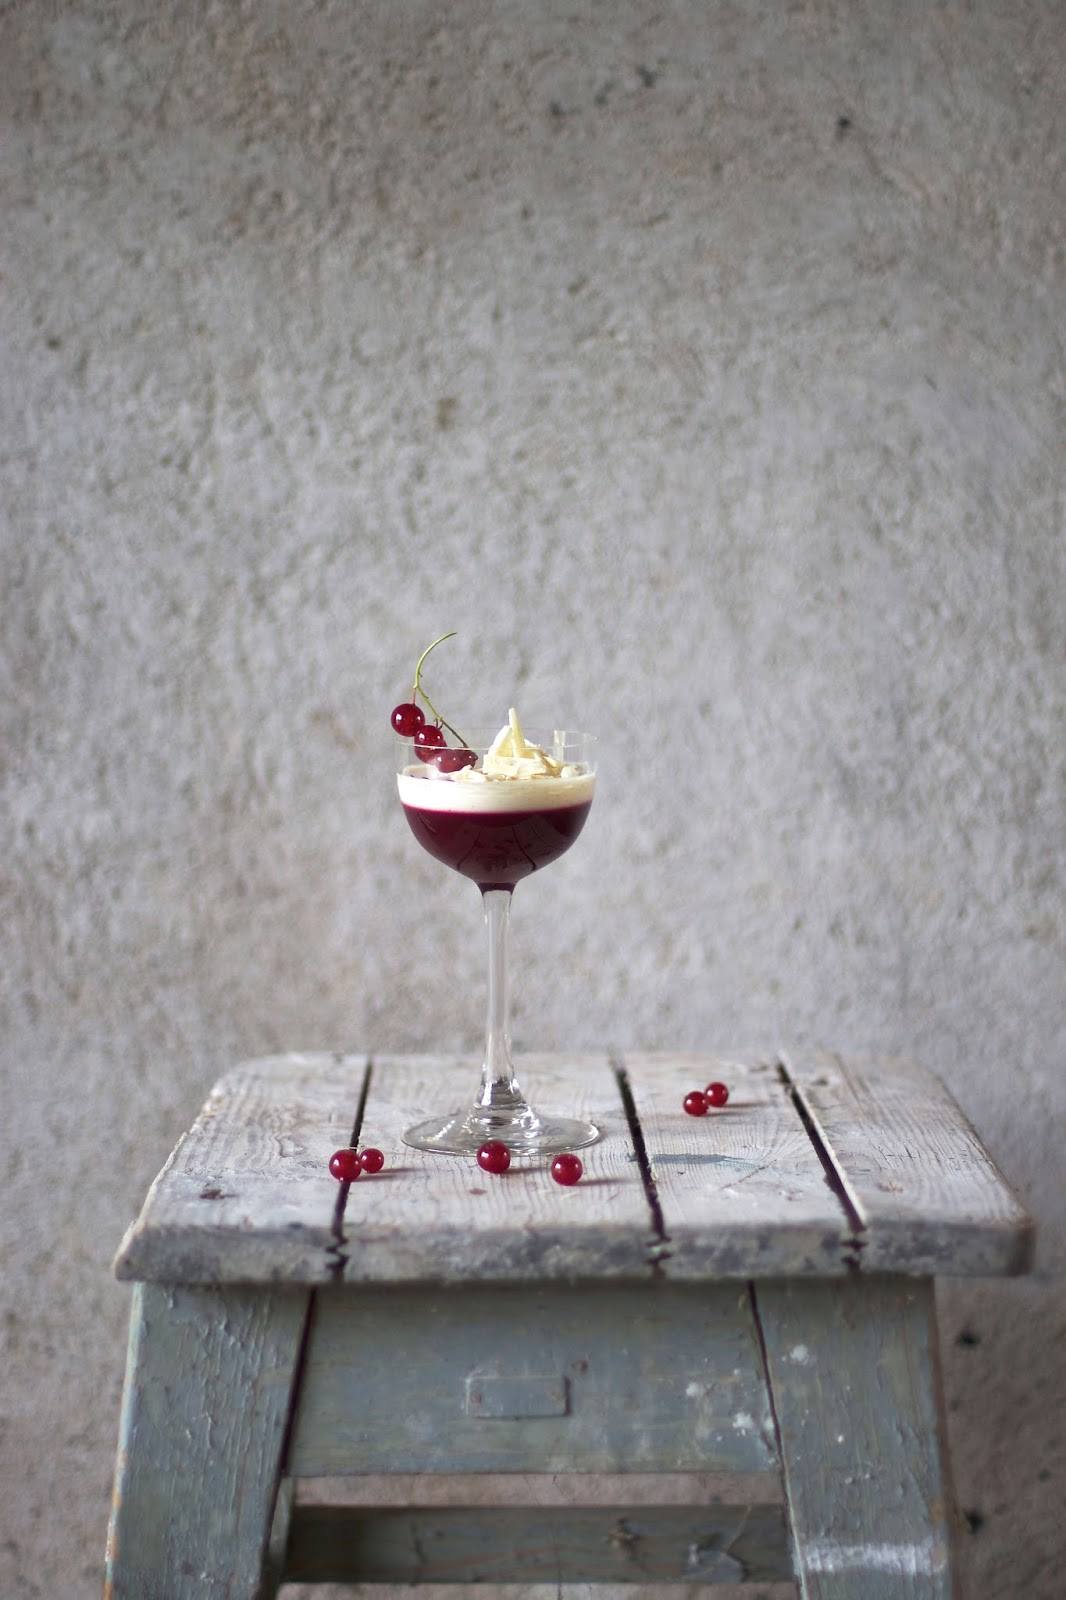 Coconut-Panna-Cotta with Currant-Jelly & White Chocolate Flakes